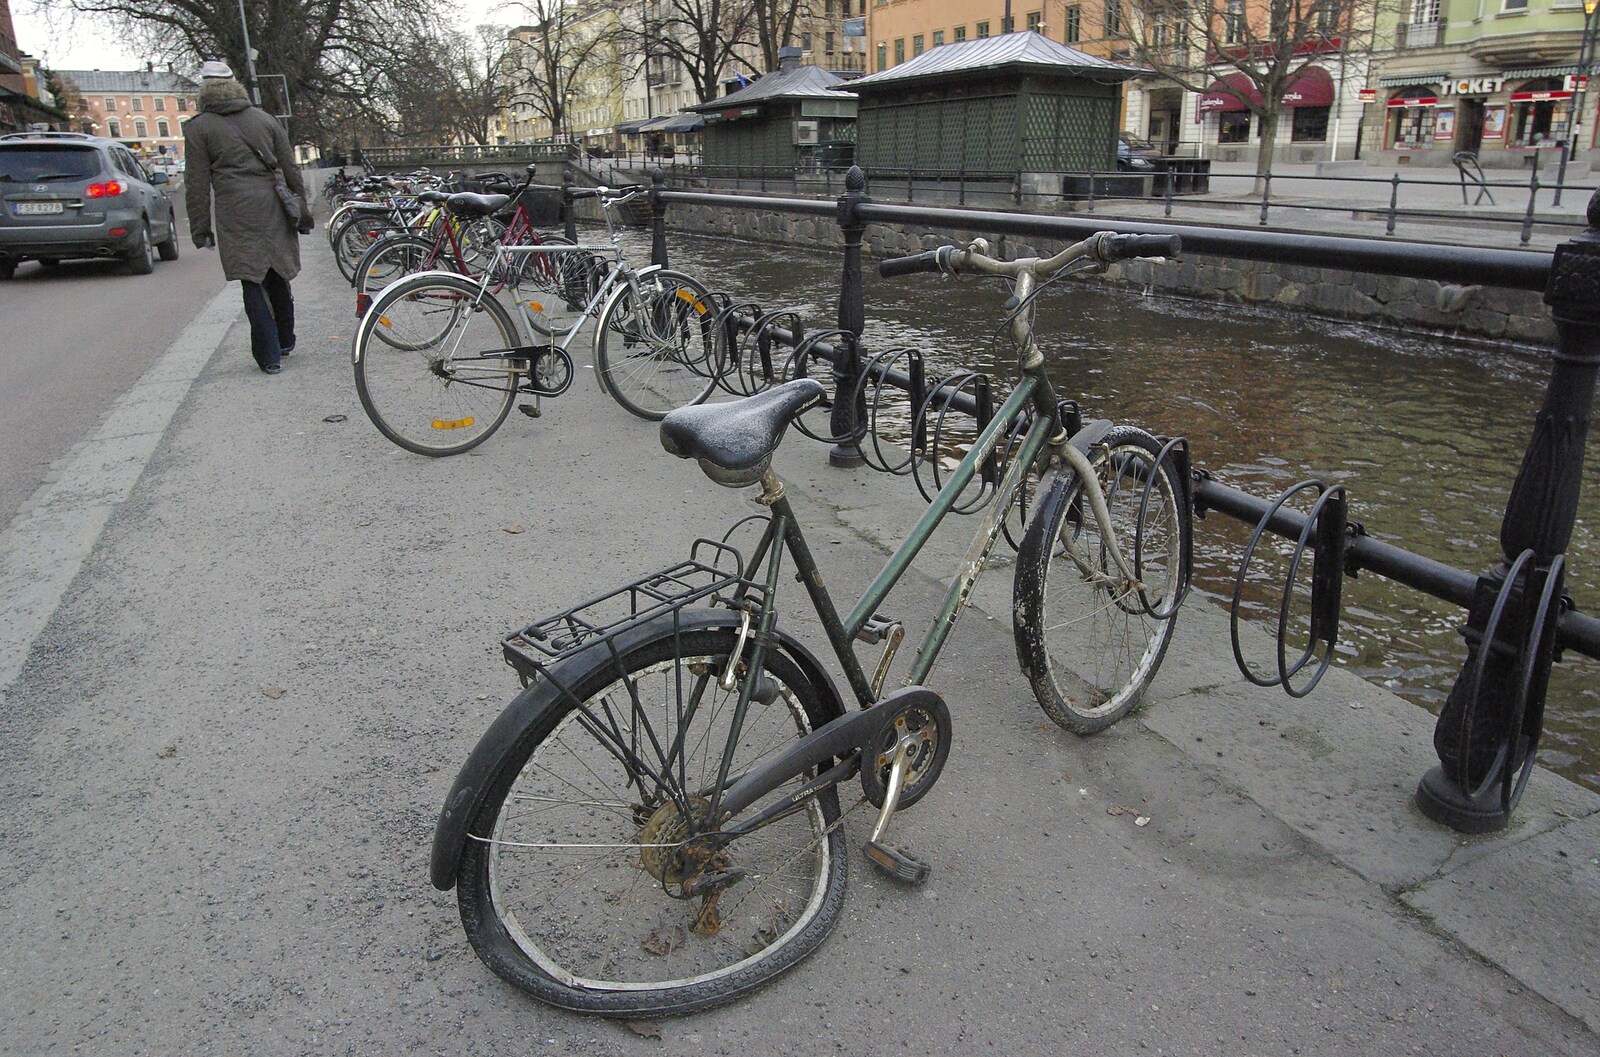 Not just Cambridge: a mangled bicycle in Uppsala from Gamla Uppsala, Uppsala County, Sweden - 16th December 2007